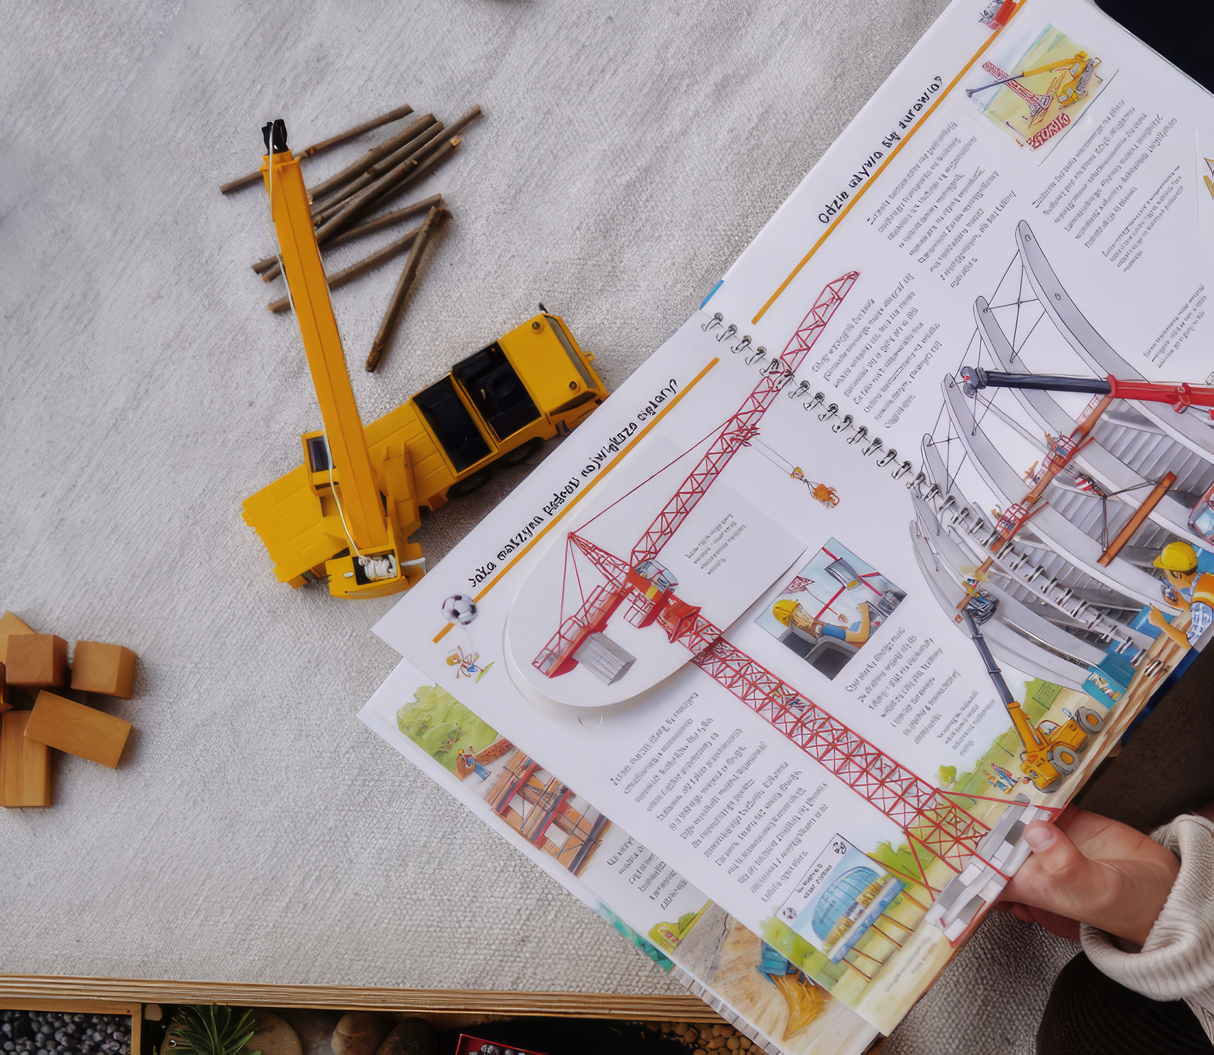 Publishing House Sam: We get to know construction vehicles